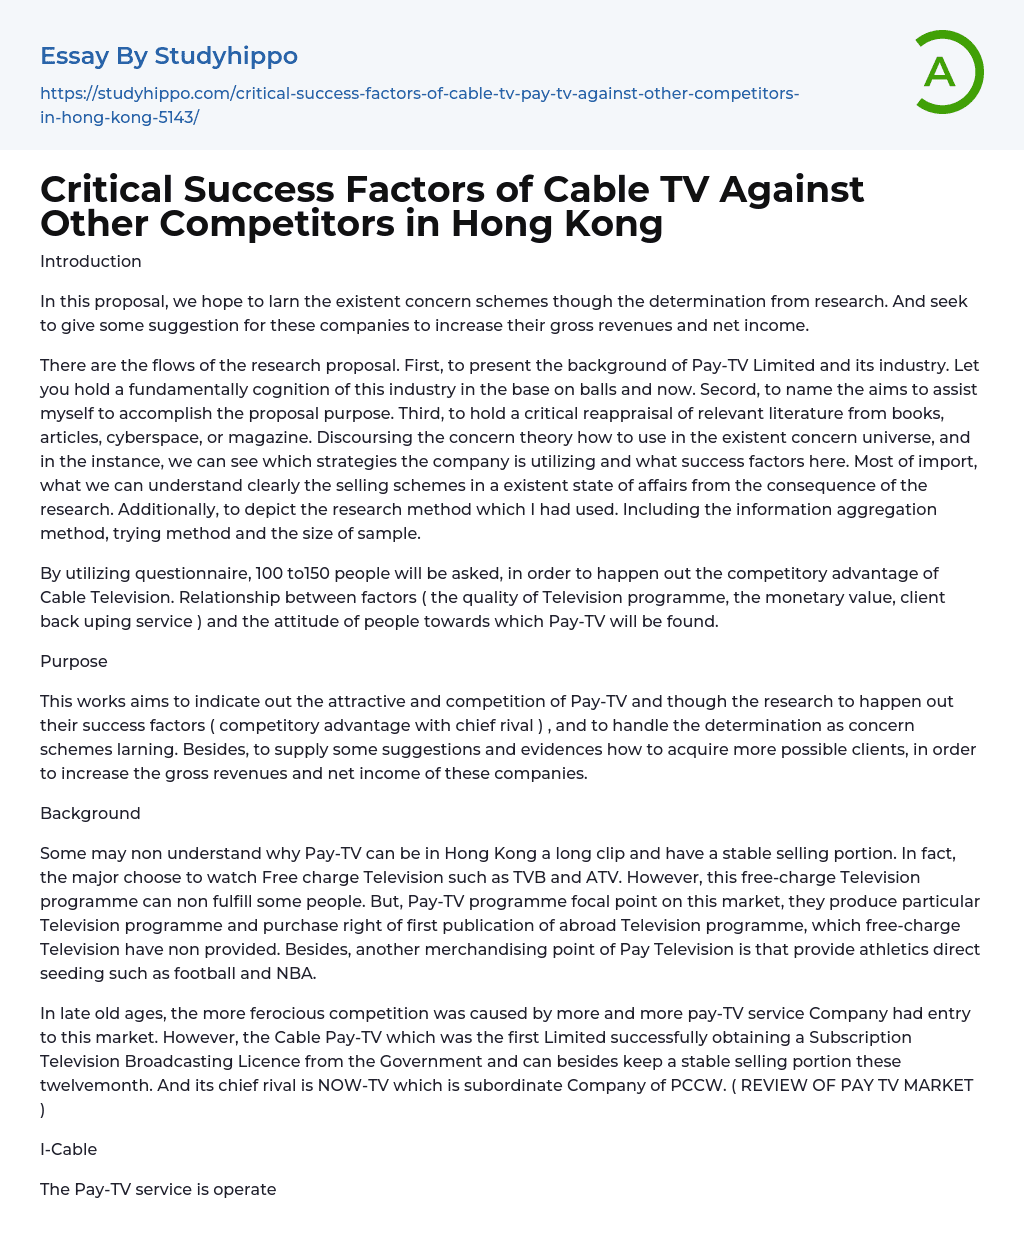 Critical Success Factors of Cable TV Against Other Competitors in Hong Kong Essay Example